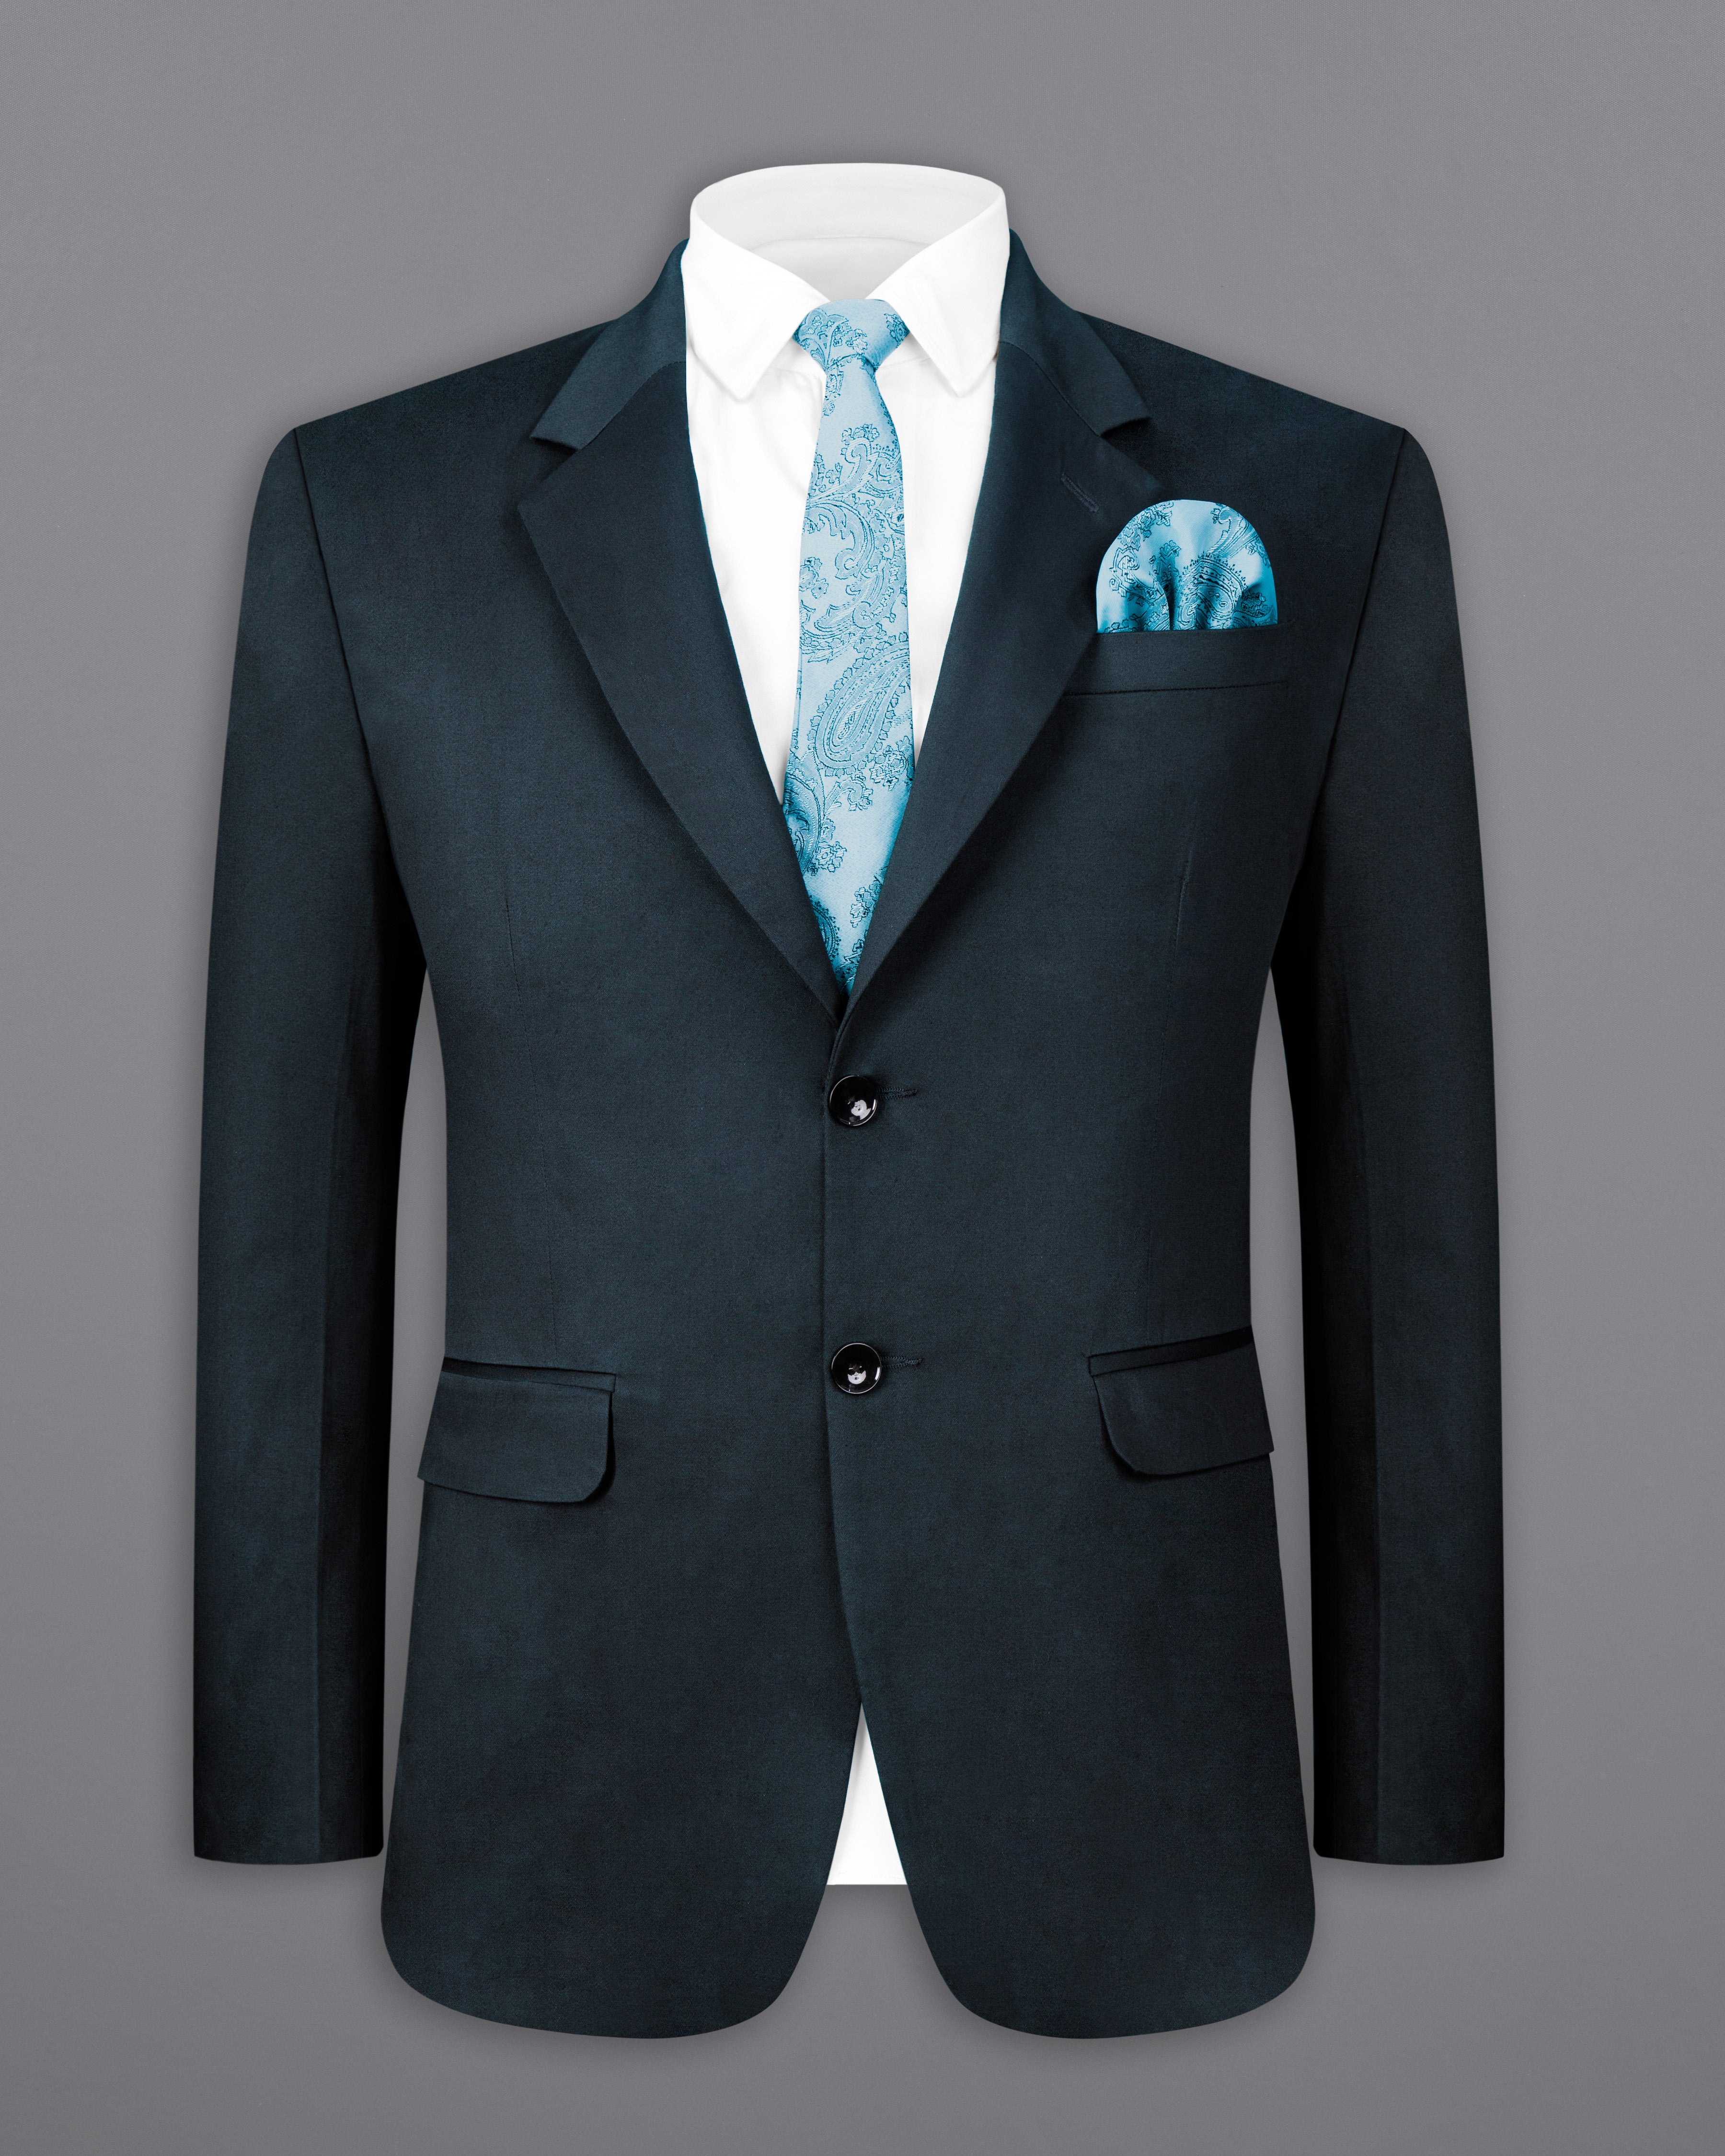 Timber Sea Blue Solid Stretchable Premium Cotton traveler Suit ST2637-SB-36,ST2637-SB-38,ST2637-SB-40,ST2637-SB-42,ST2637-SB-44,ST2637-SB-46,ST2637-SB-48,ST2637-SB-50,ST2637-SB-52,ST2637-SB-54,ST2637-SB-56,ST2637-SB-58,ST2637-SB-60